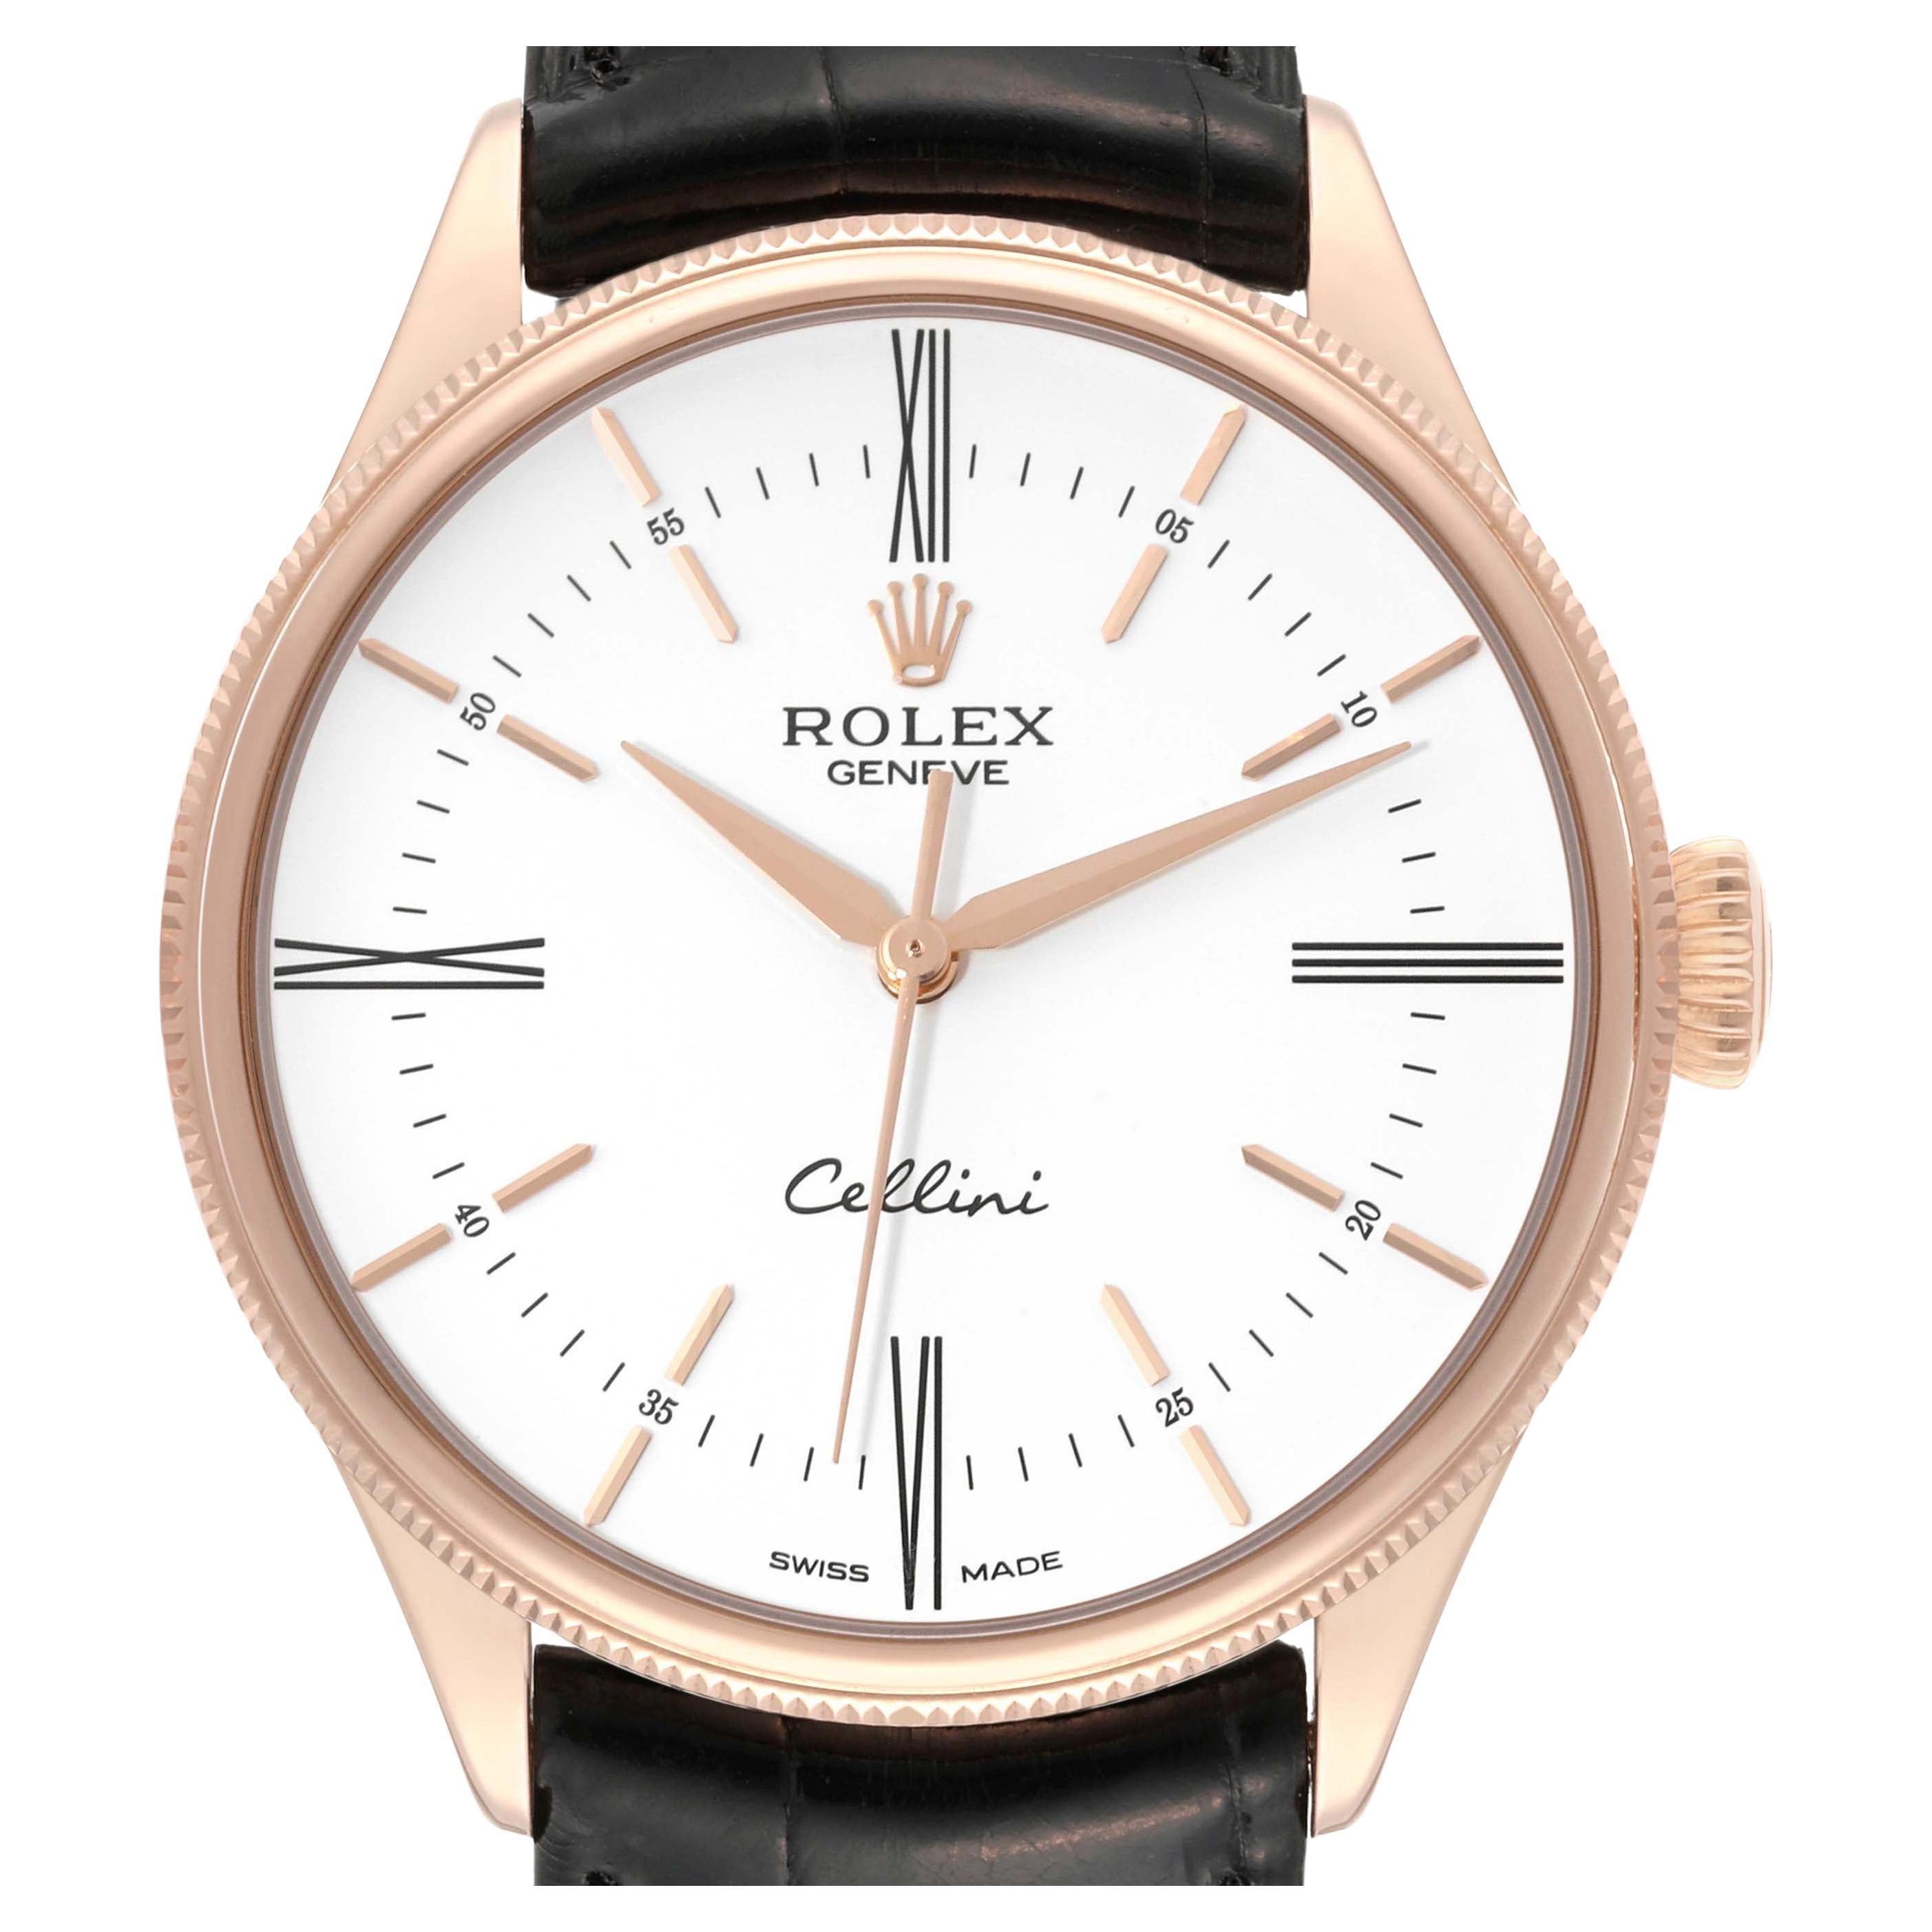 Rolex Cellini Time White Dial Rose Gold Mens Watch 50505 Box Card